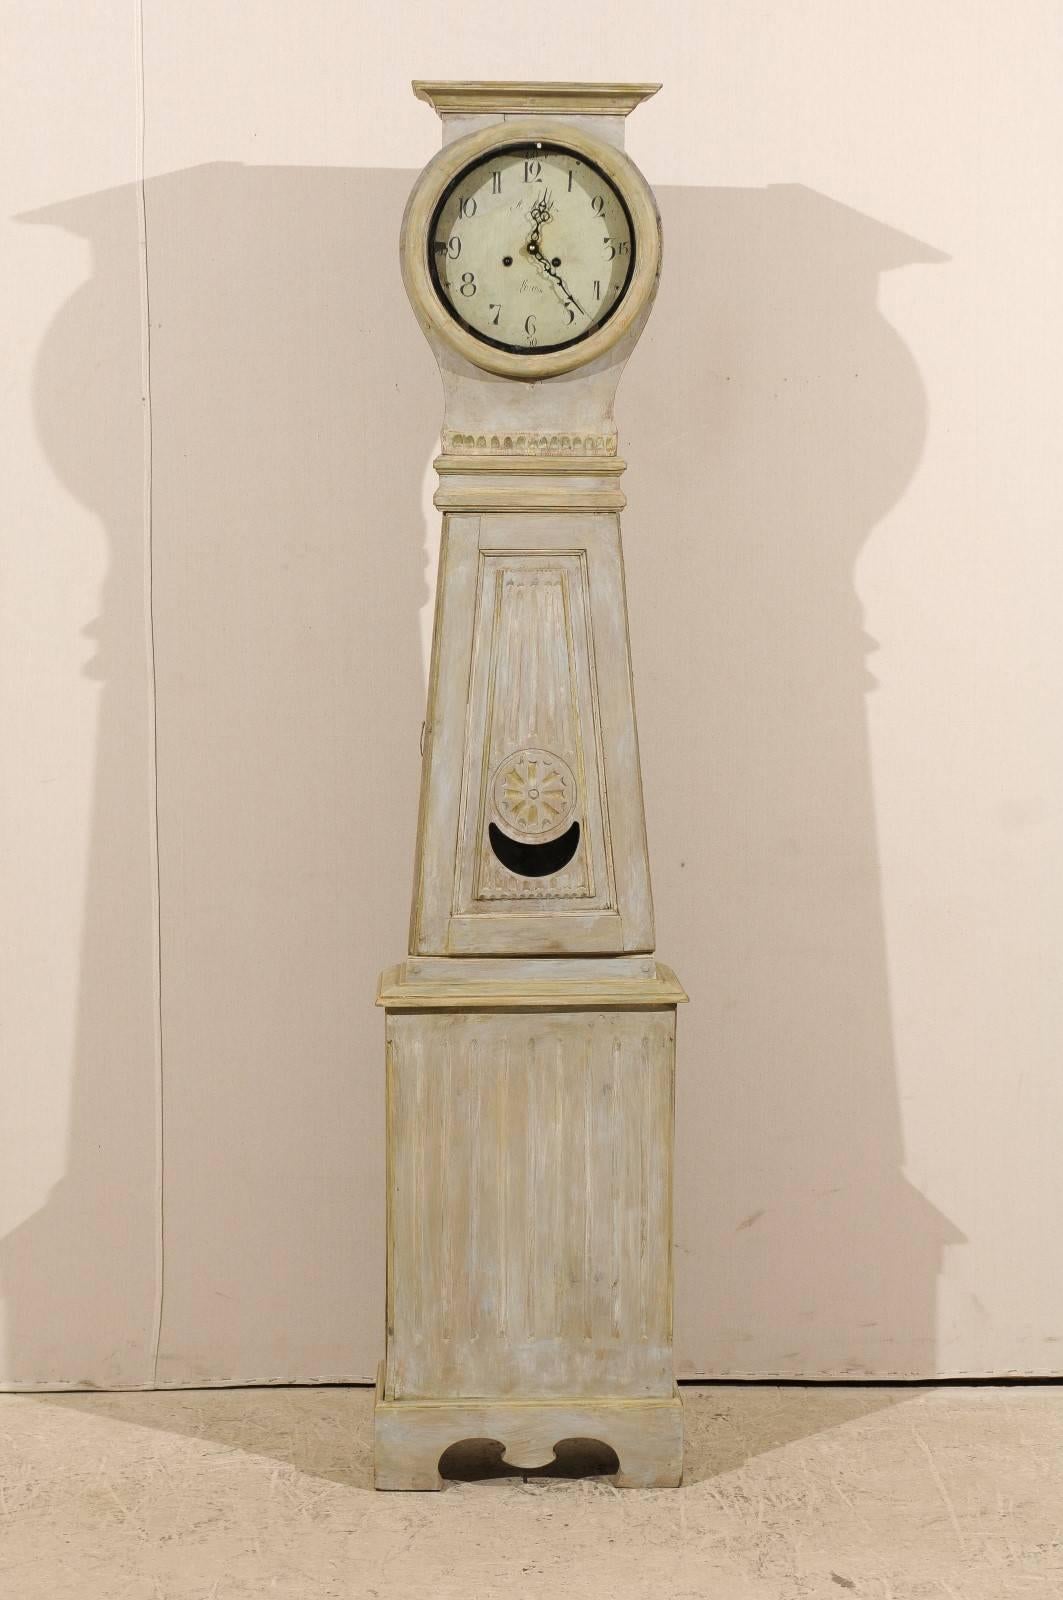 A Swedish painted wood clock from the 19th century. This Swedish clock from circa 1830-1840 features more of a linear shape compared to most of our clocks. Its round head is topped with a flat carving and a carved molding decorates the neck. The